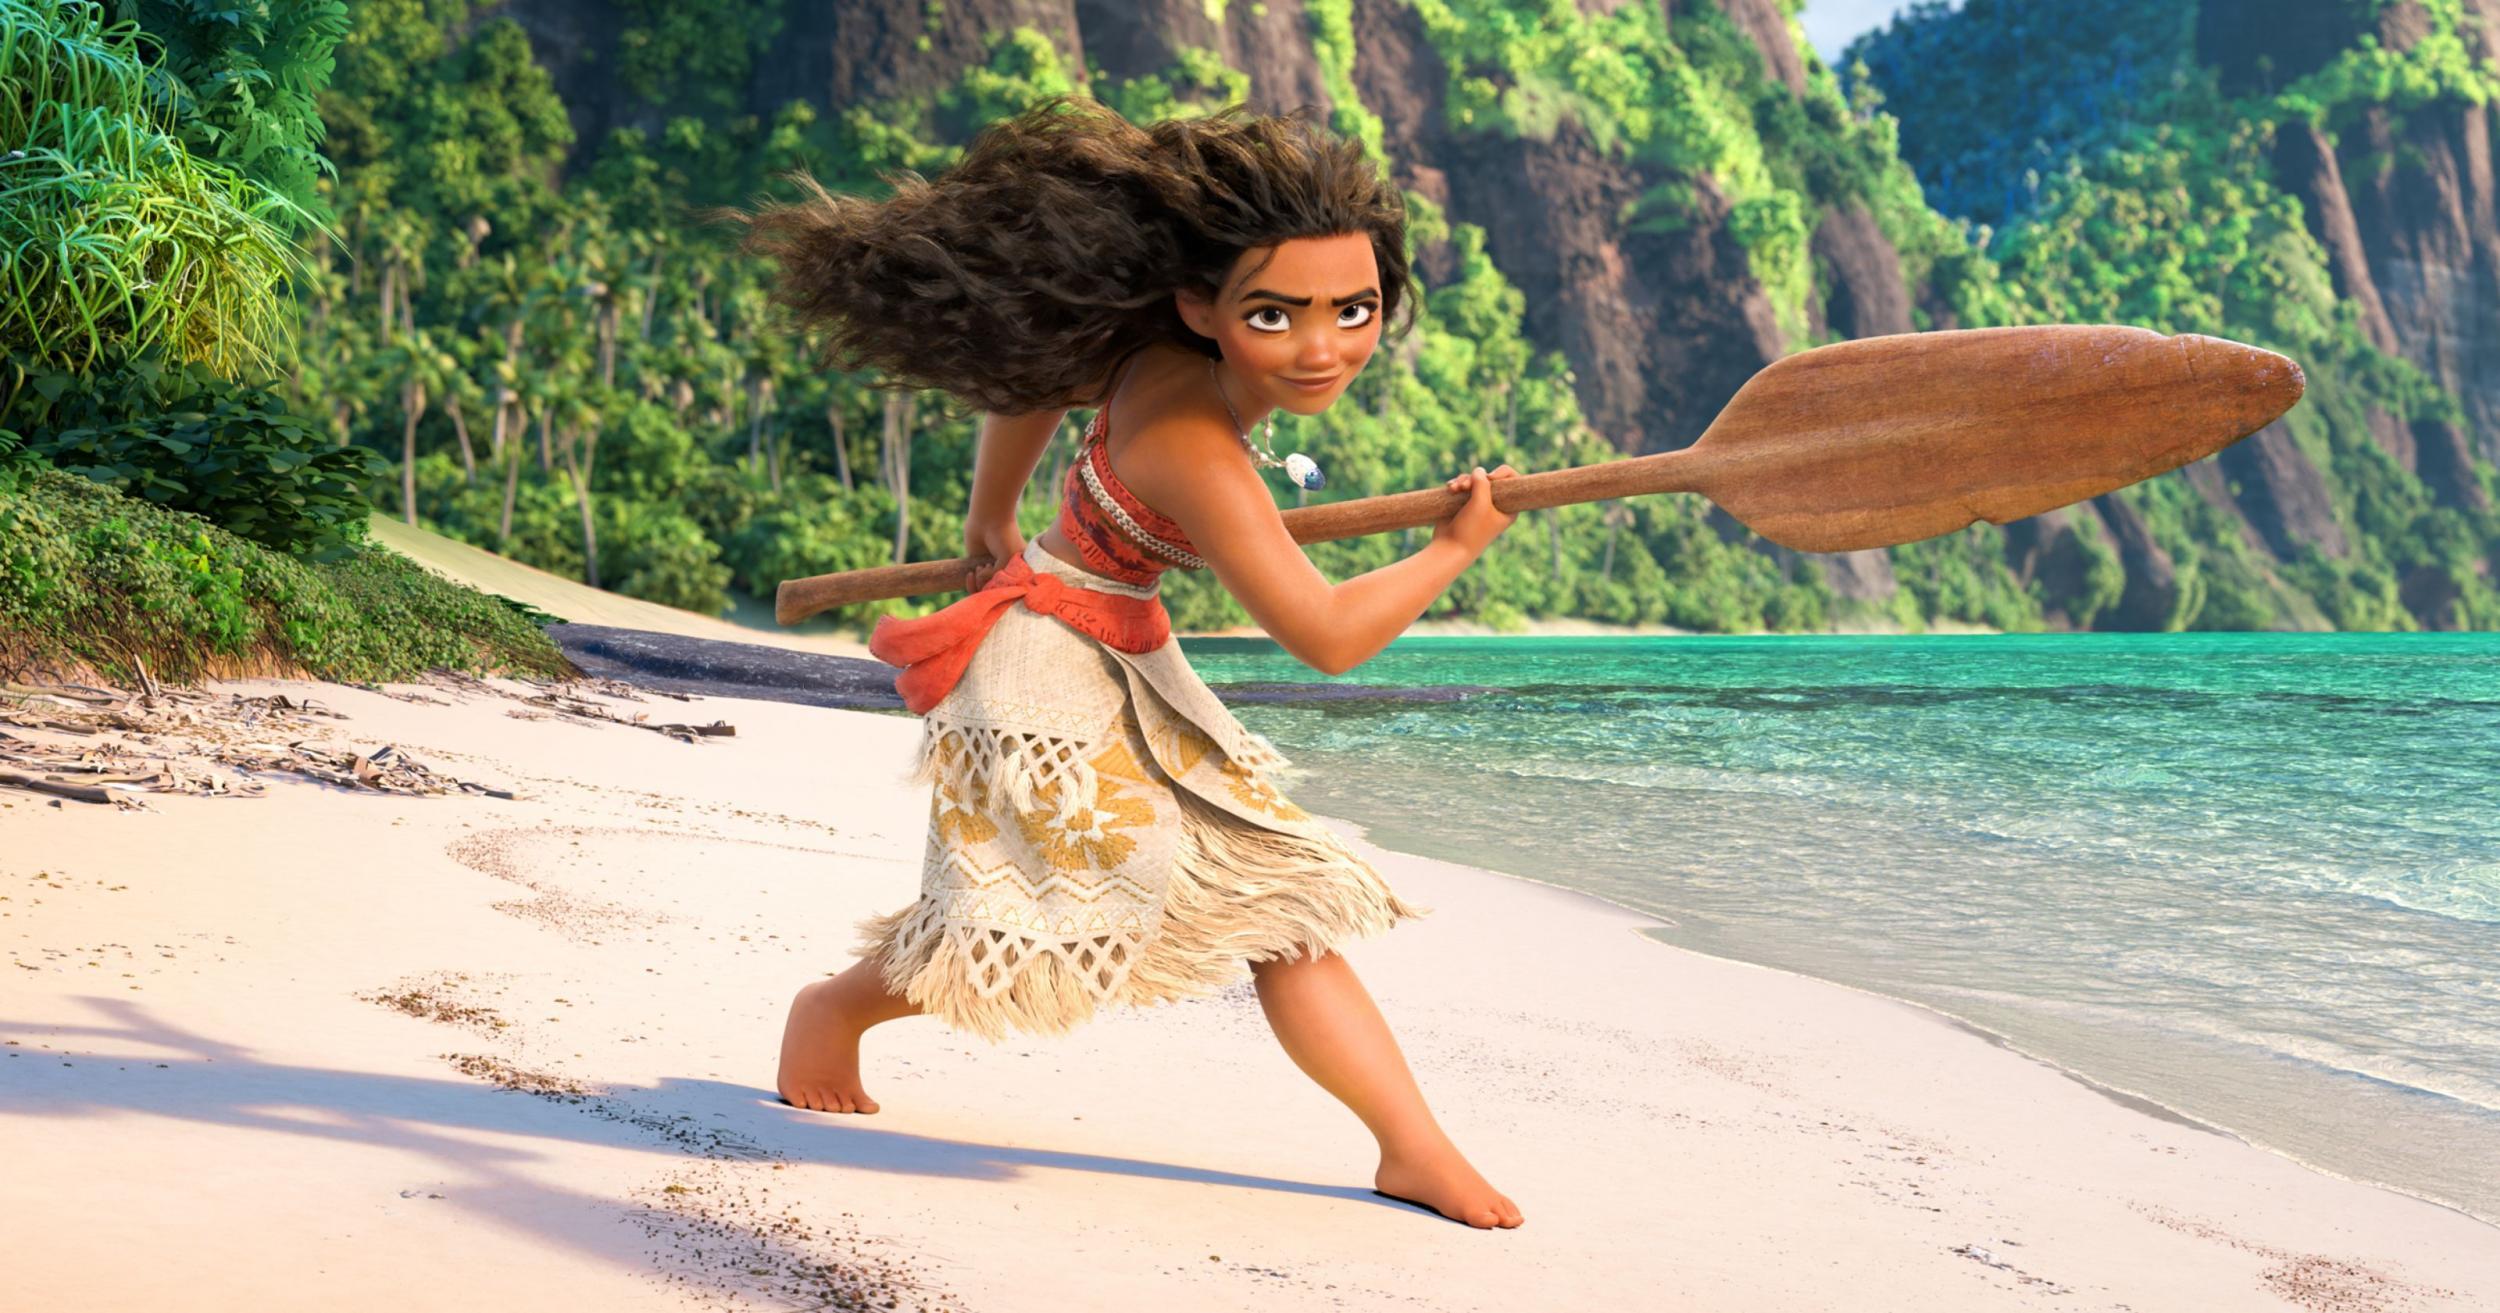 Moana is a shining example of Disney’s move to present empowering female roles in their films